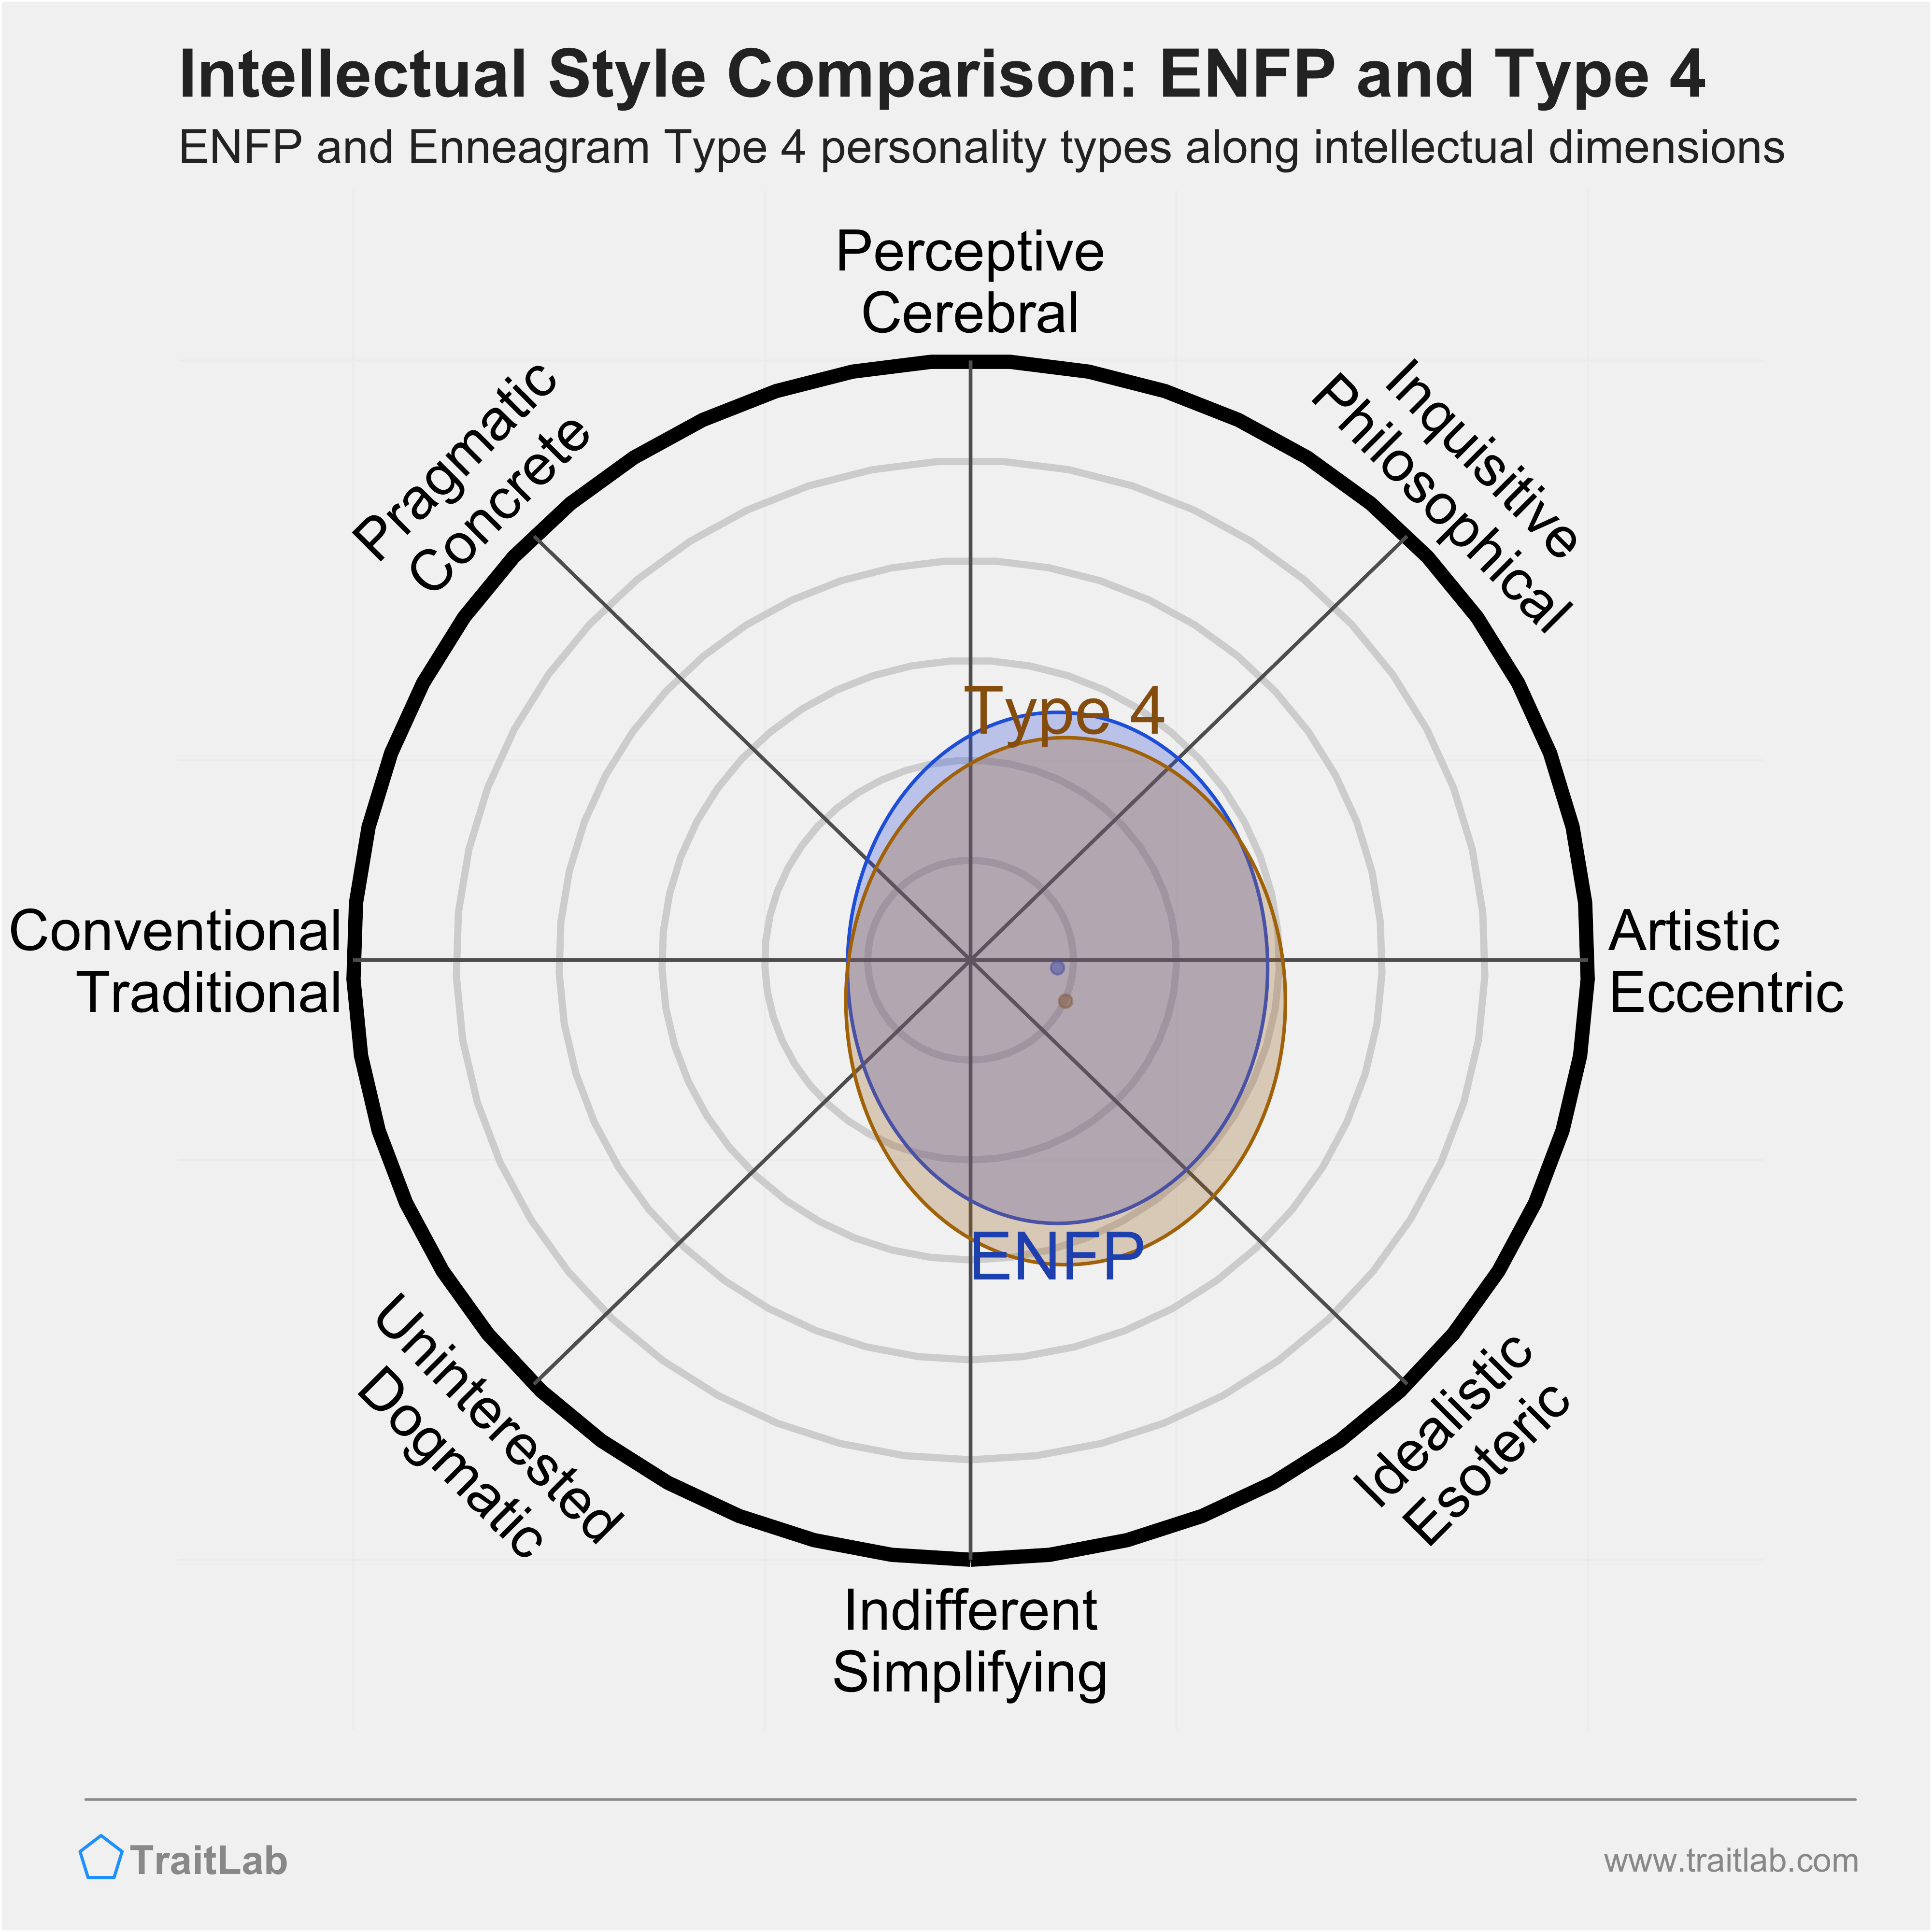 ENFP and Type 4 comparison across intellectual dimensions